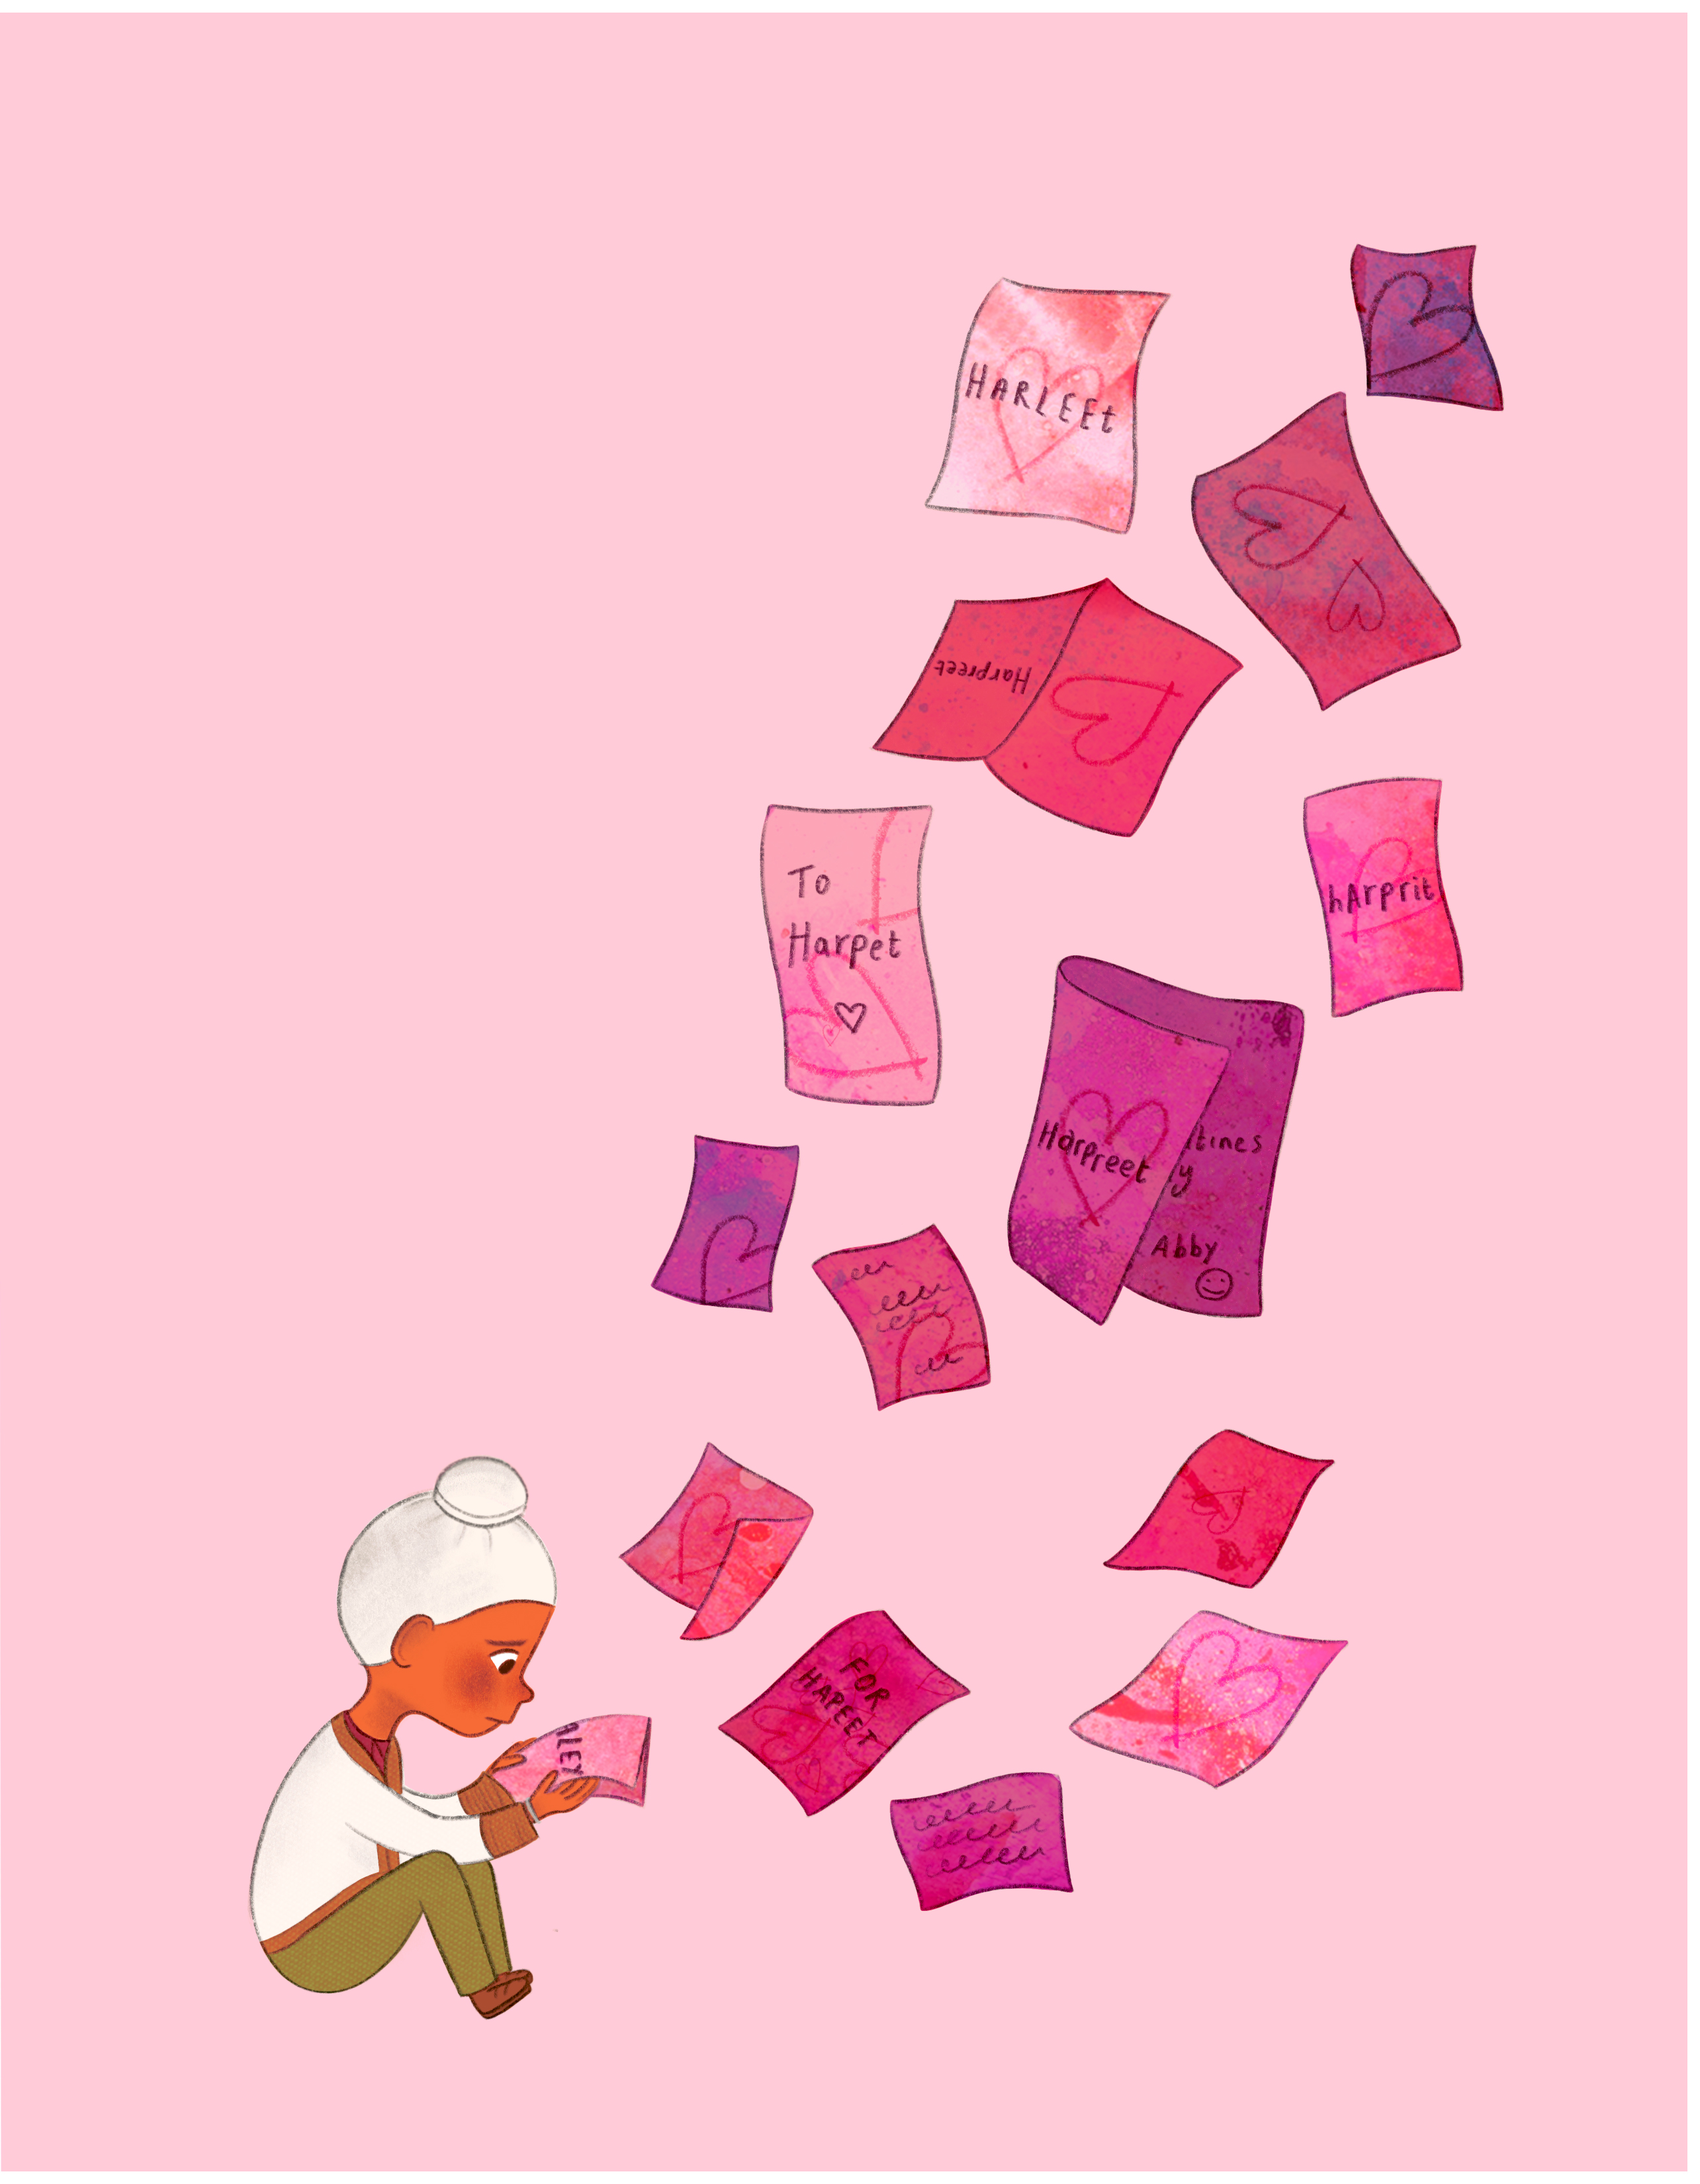 Image shows Harpreet sat on the floor wearing a white patka and a number of folded papers falling like leaves. Each piece has his name written in different spelling orders. Background is all pink.